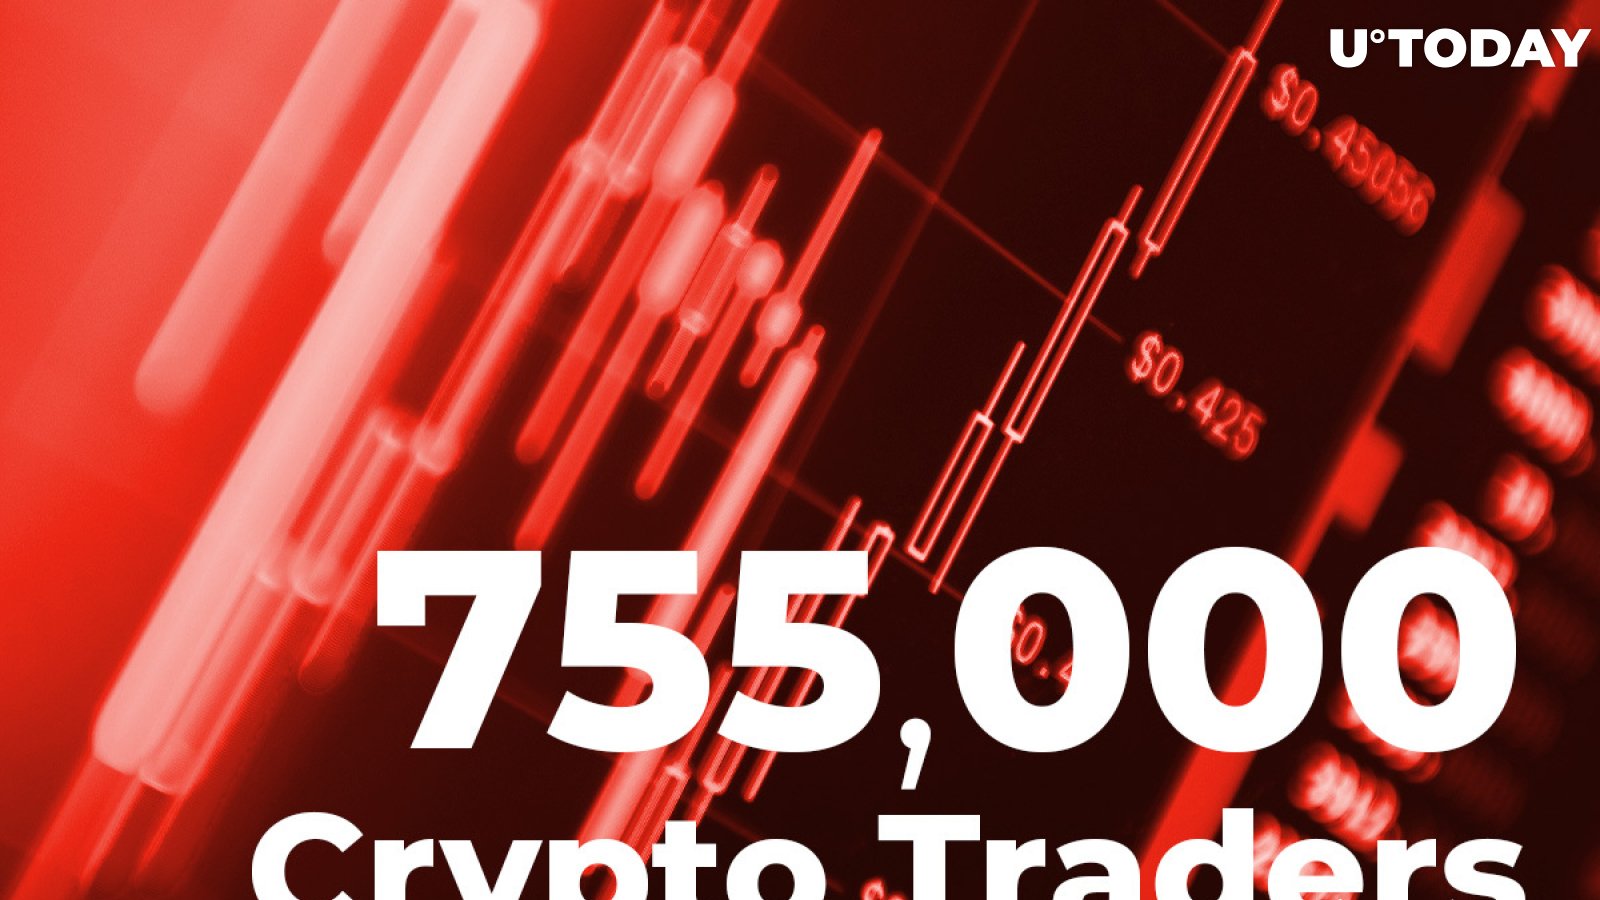 More Than 755,000 Crypto Traders Liquidated in One Day